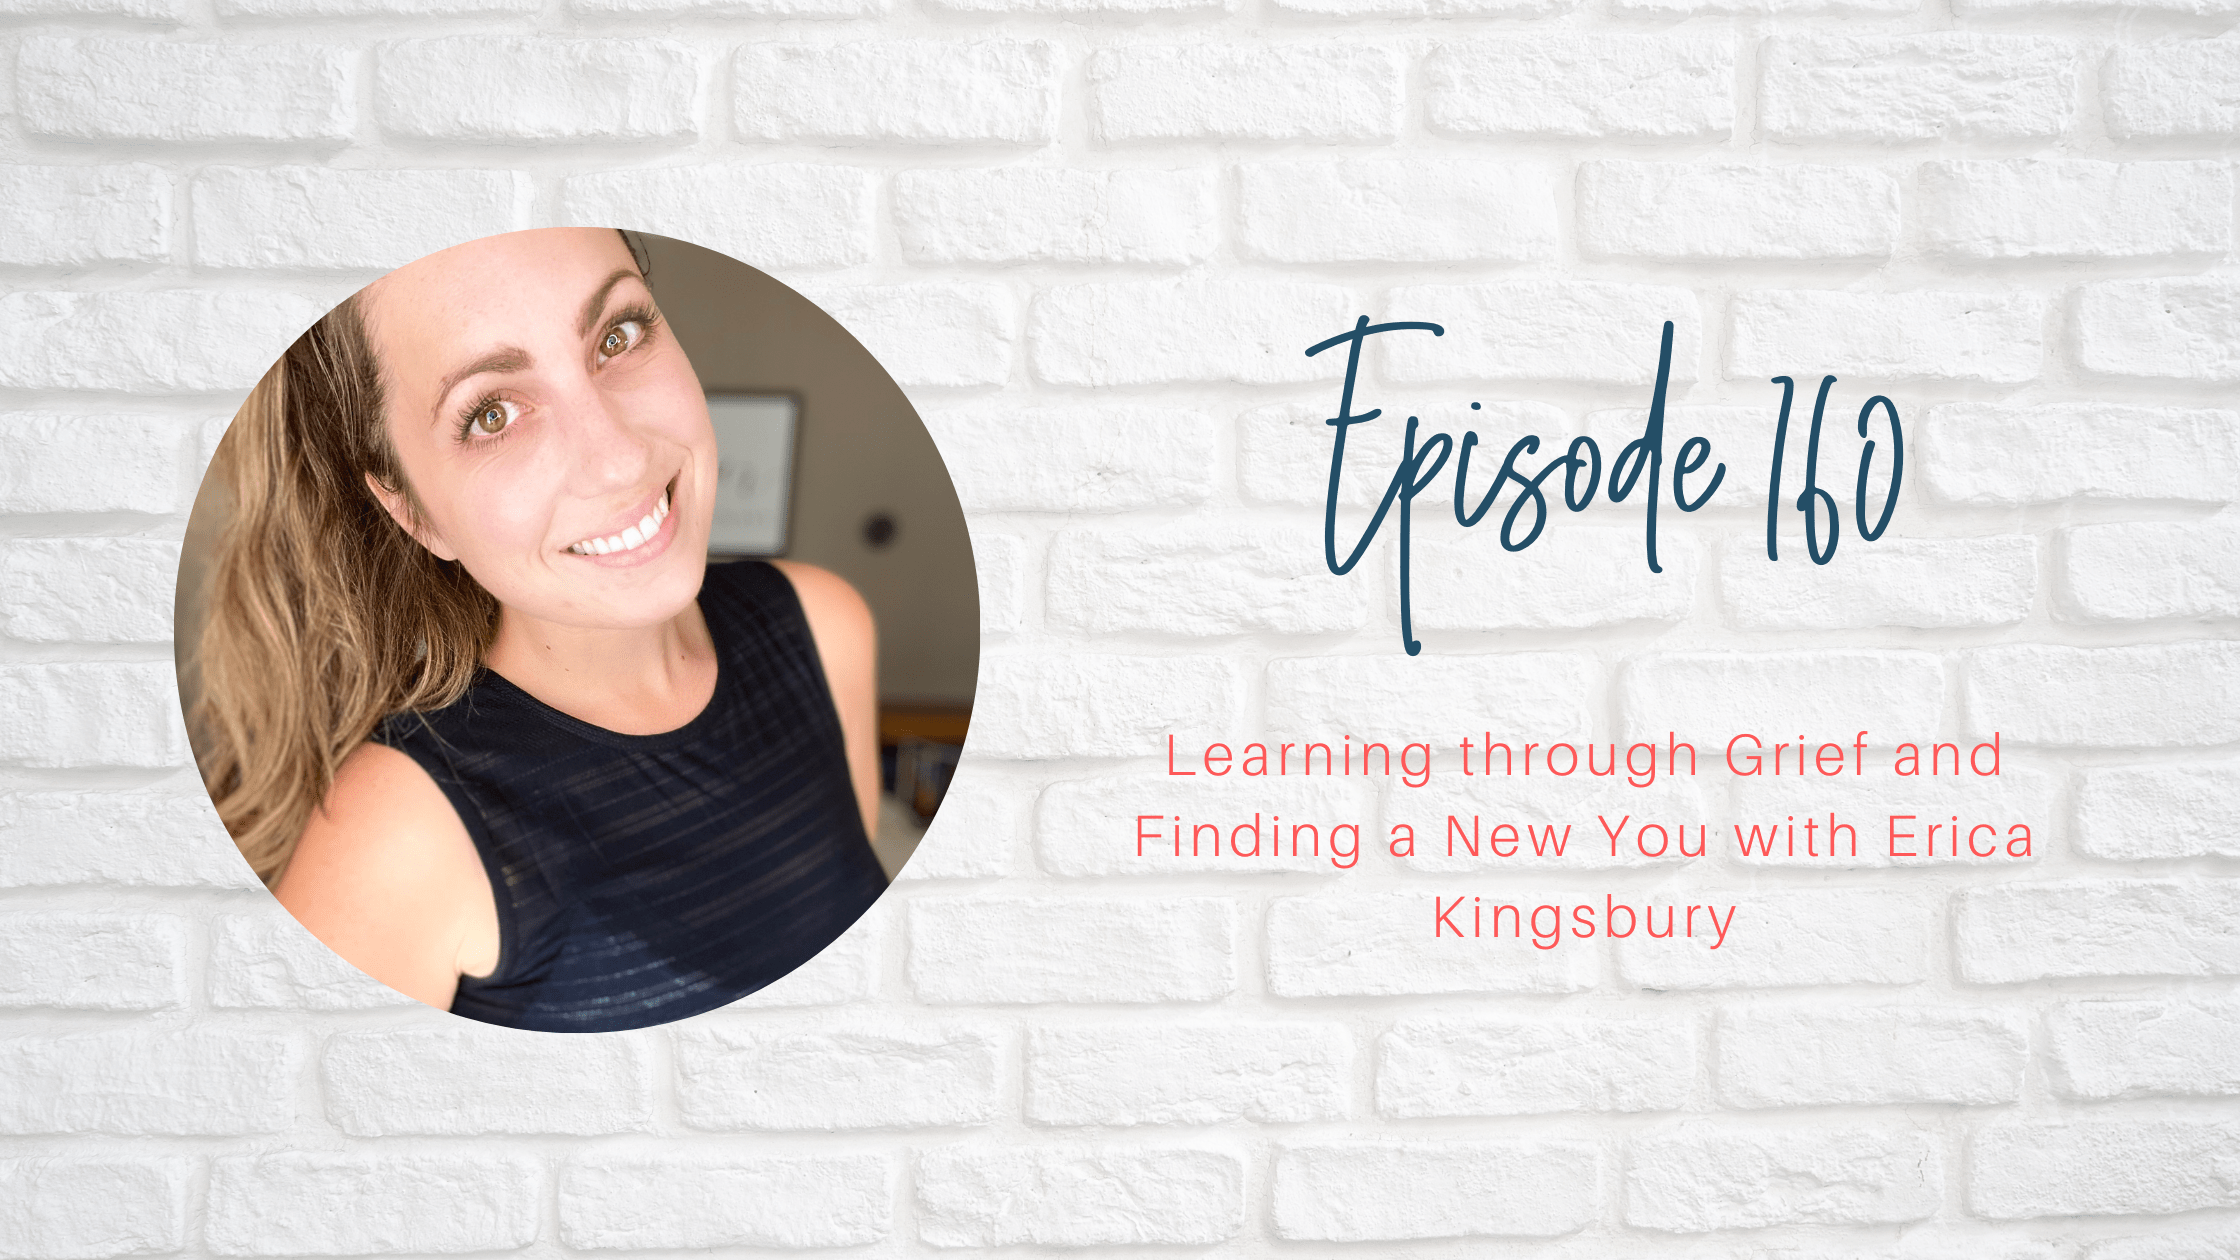 Learning through Grief and Finding a New You with Erica Kingsbury